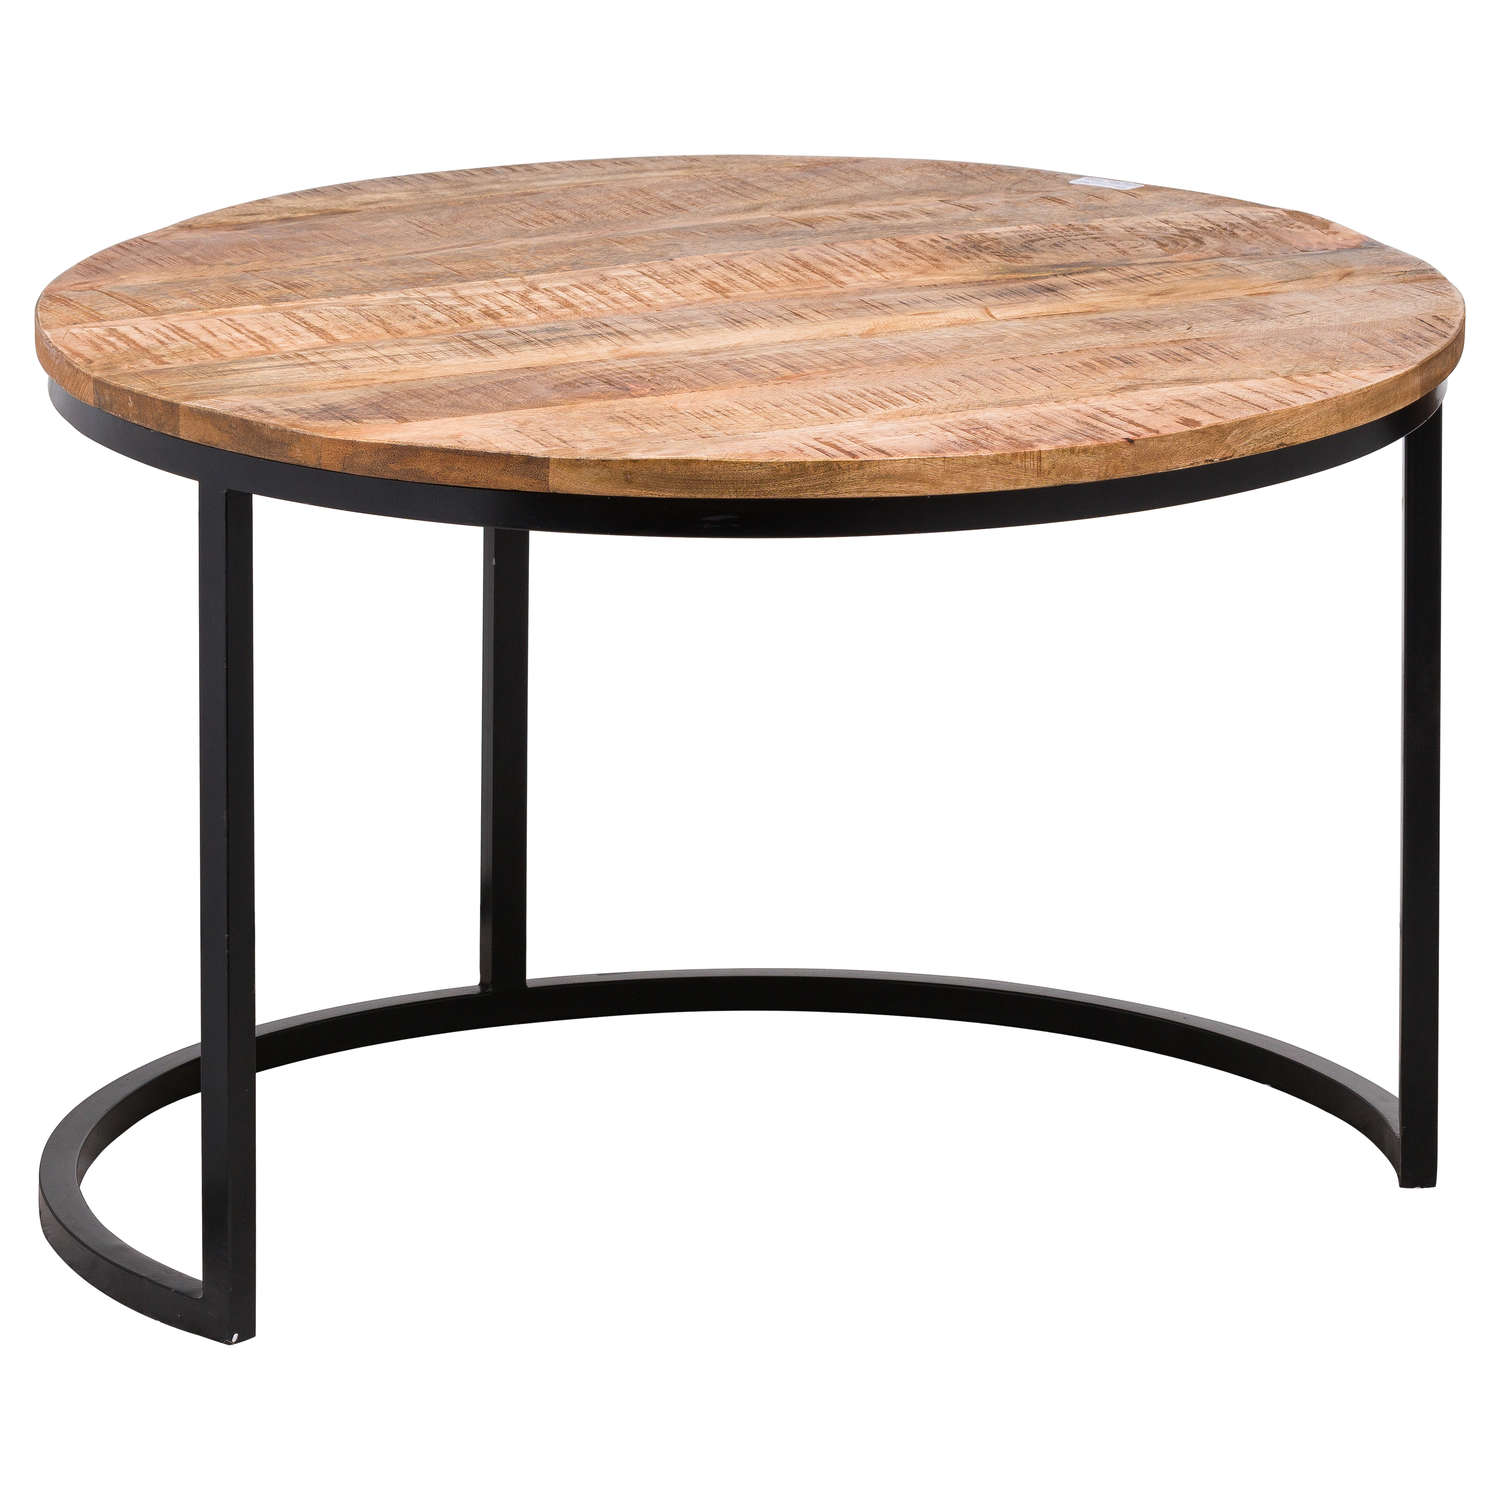 Set Of Three Industrial Tables - Image 3